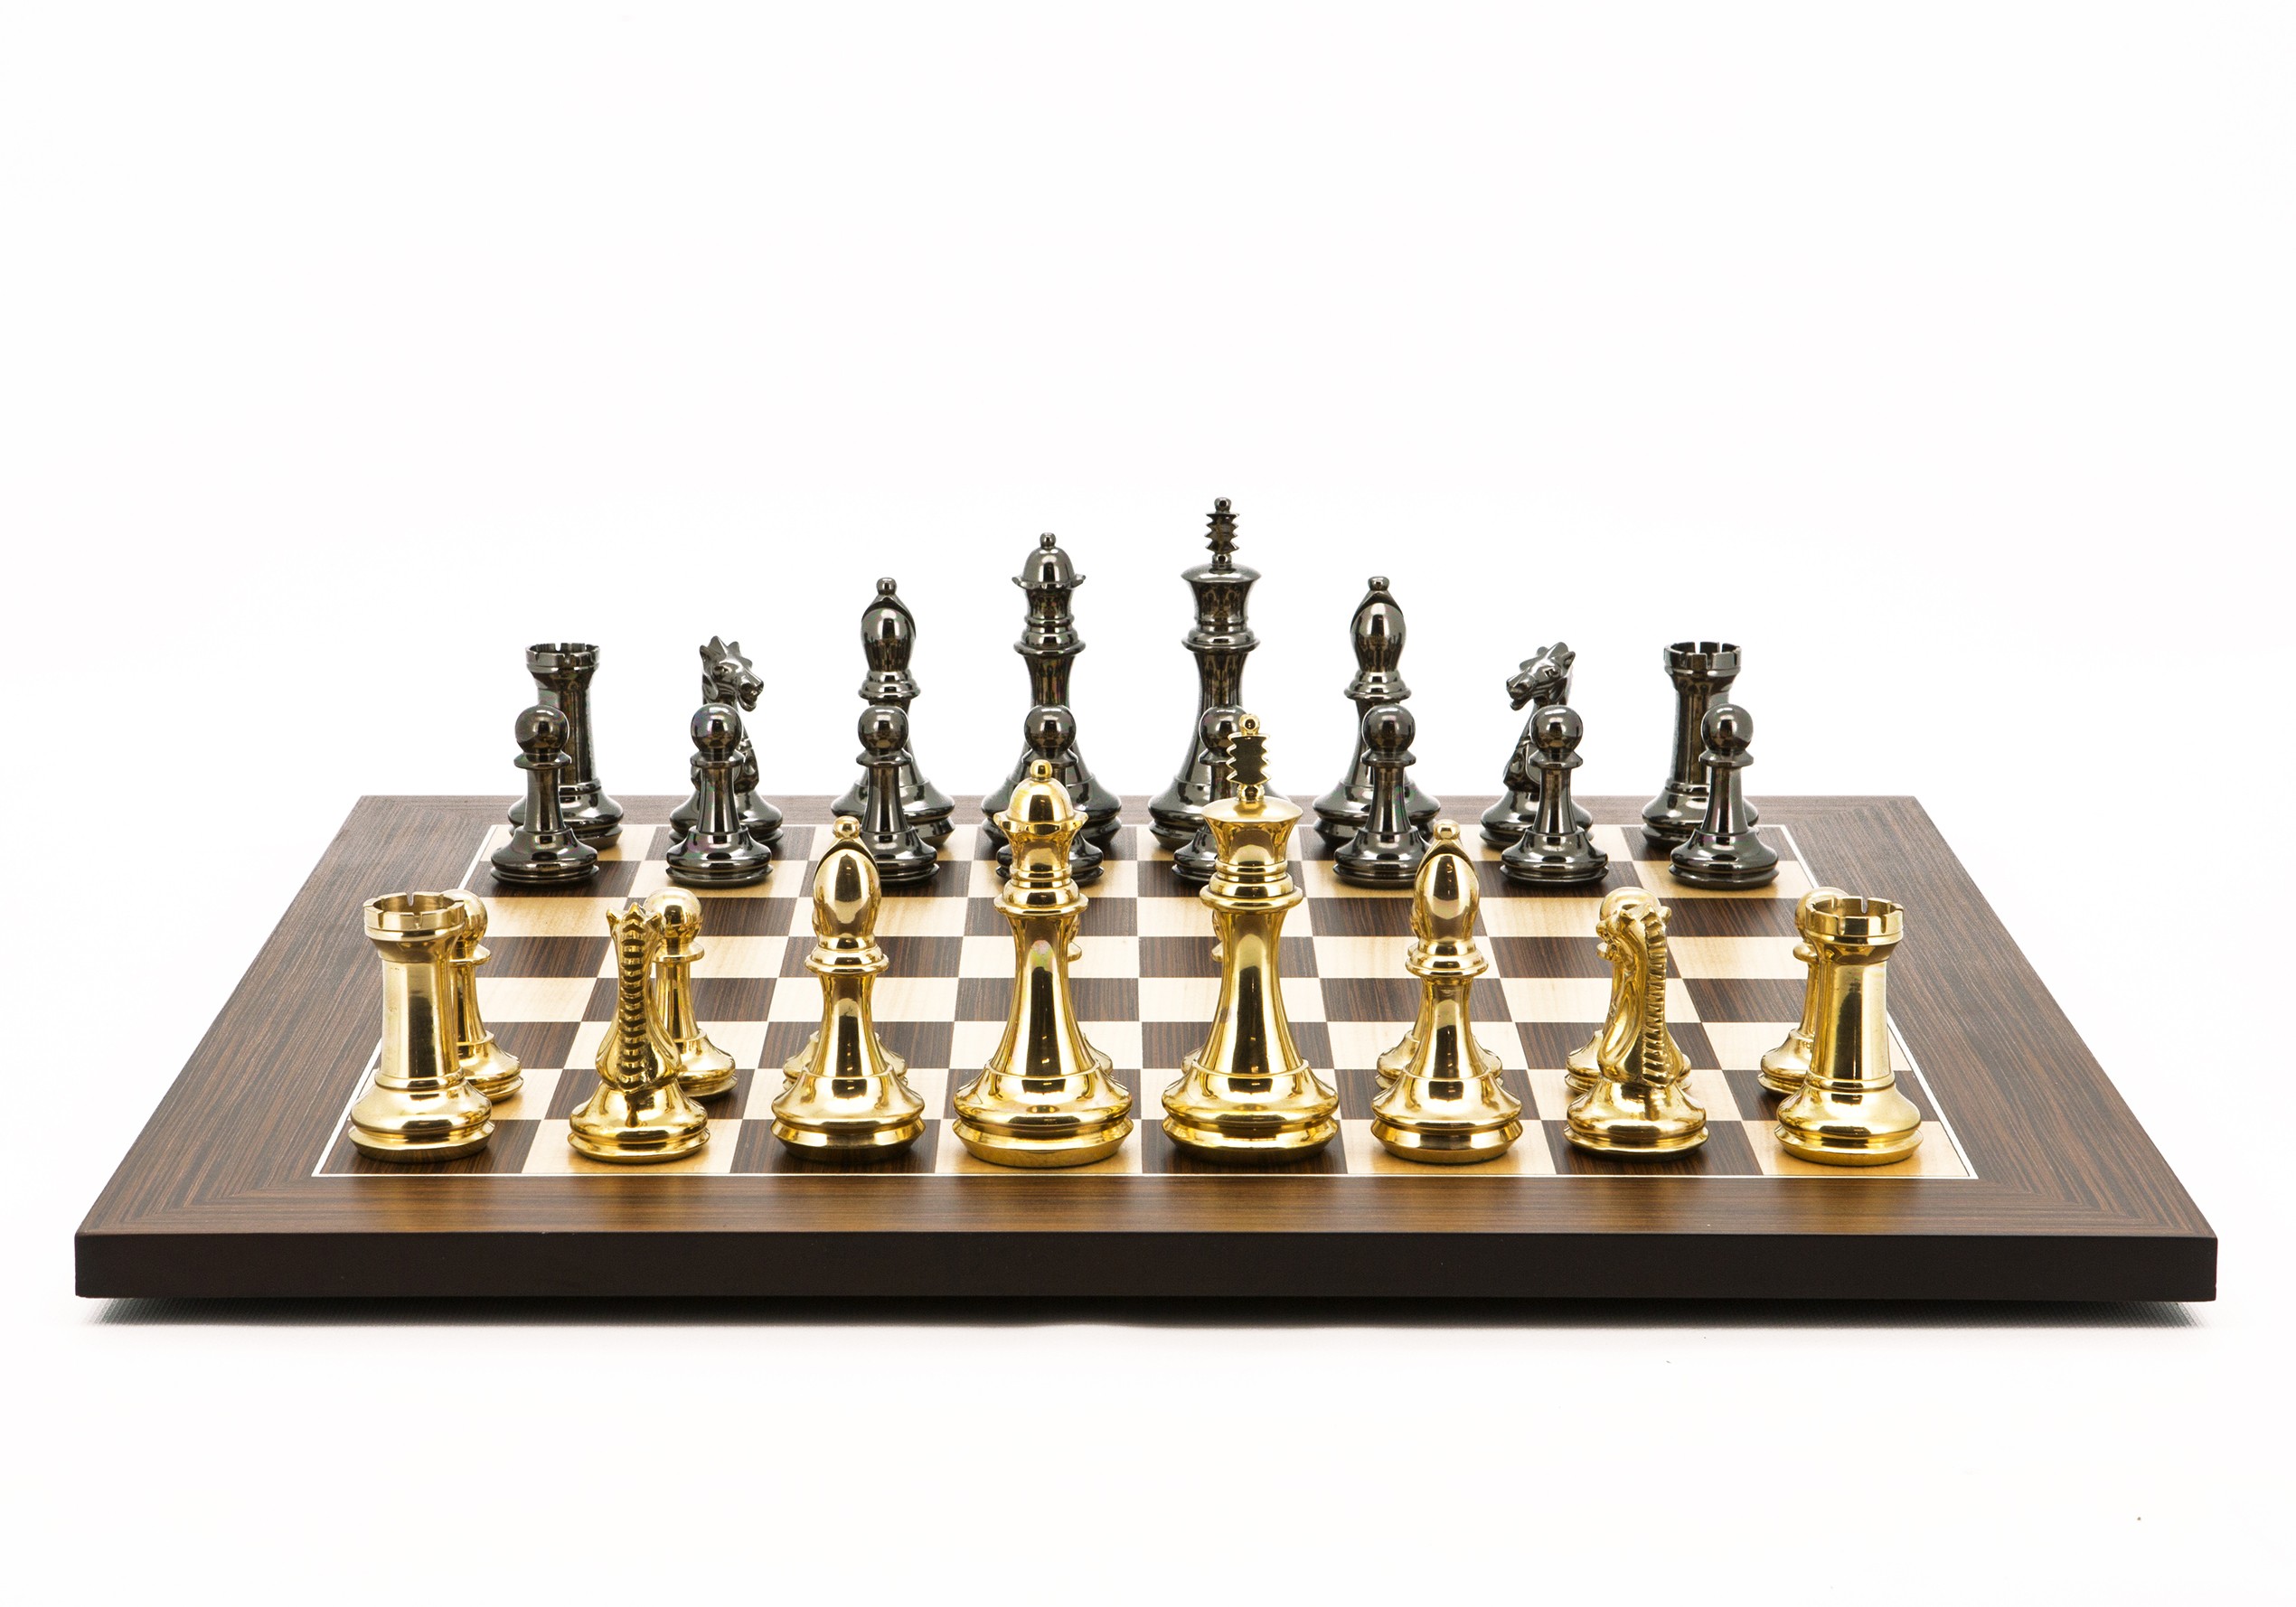 Dal Rossi Italy Chess Set  Mahogany Maple Flat Board 50cm, With Very Heavy Brass Staunton Gold and Silver chessmen 110mm